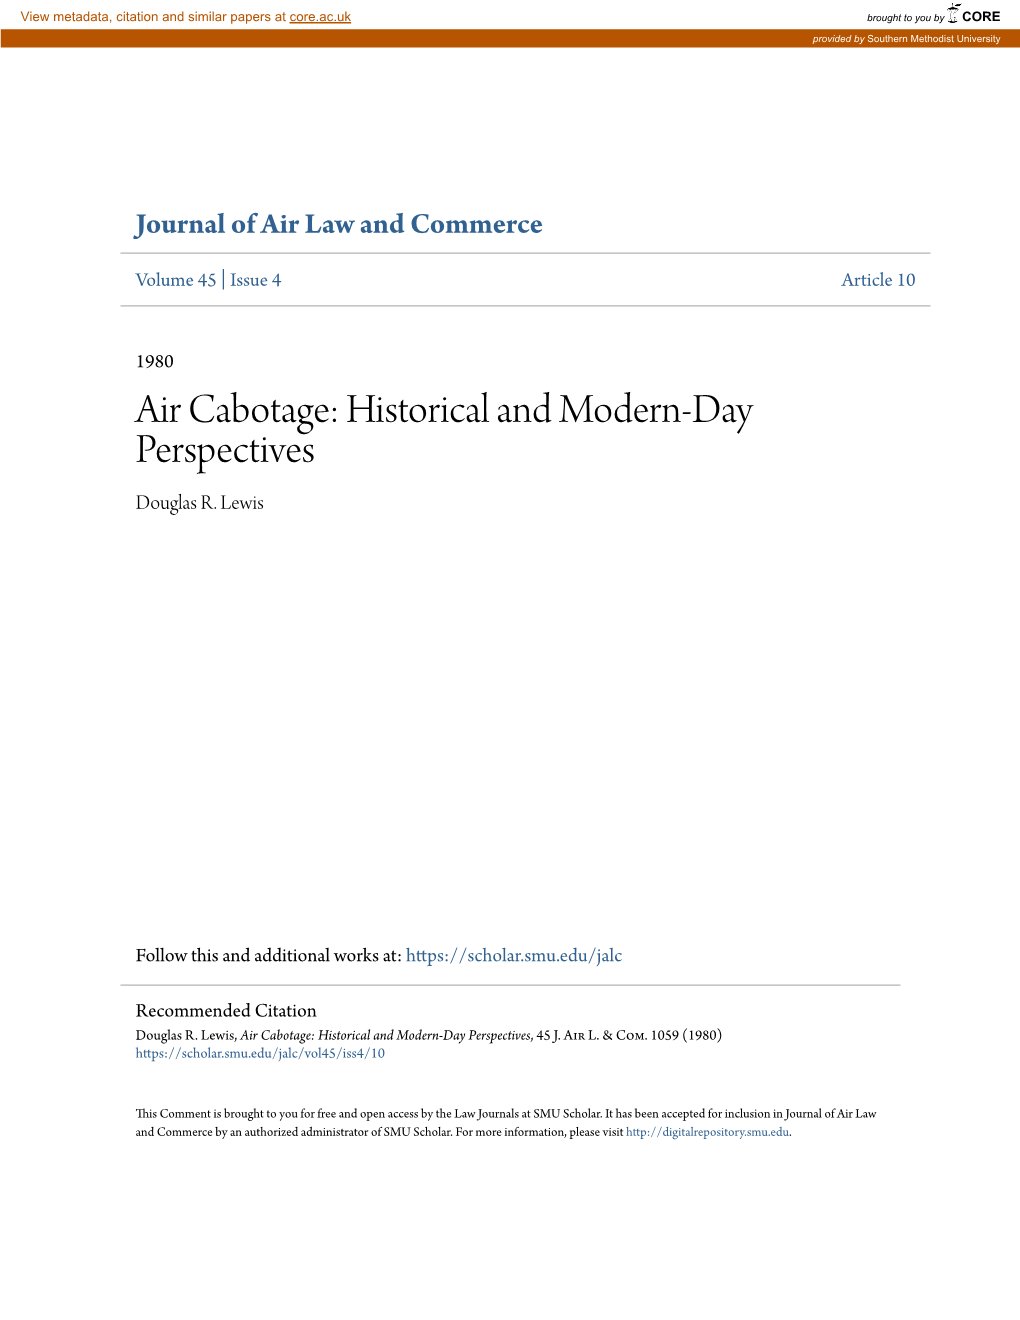 Air Cabotage: Historical and Modern-Day Perspectives Douglas R